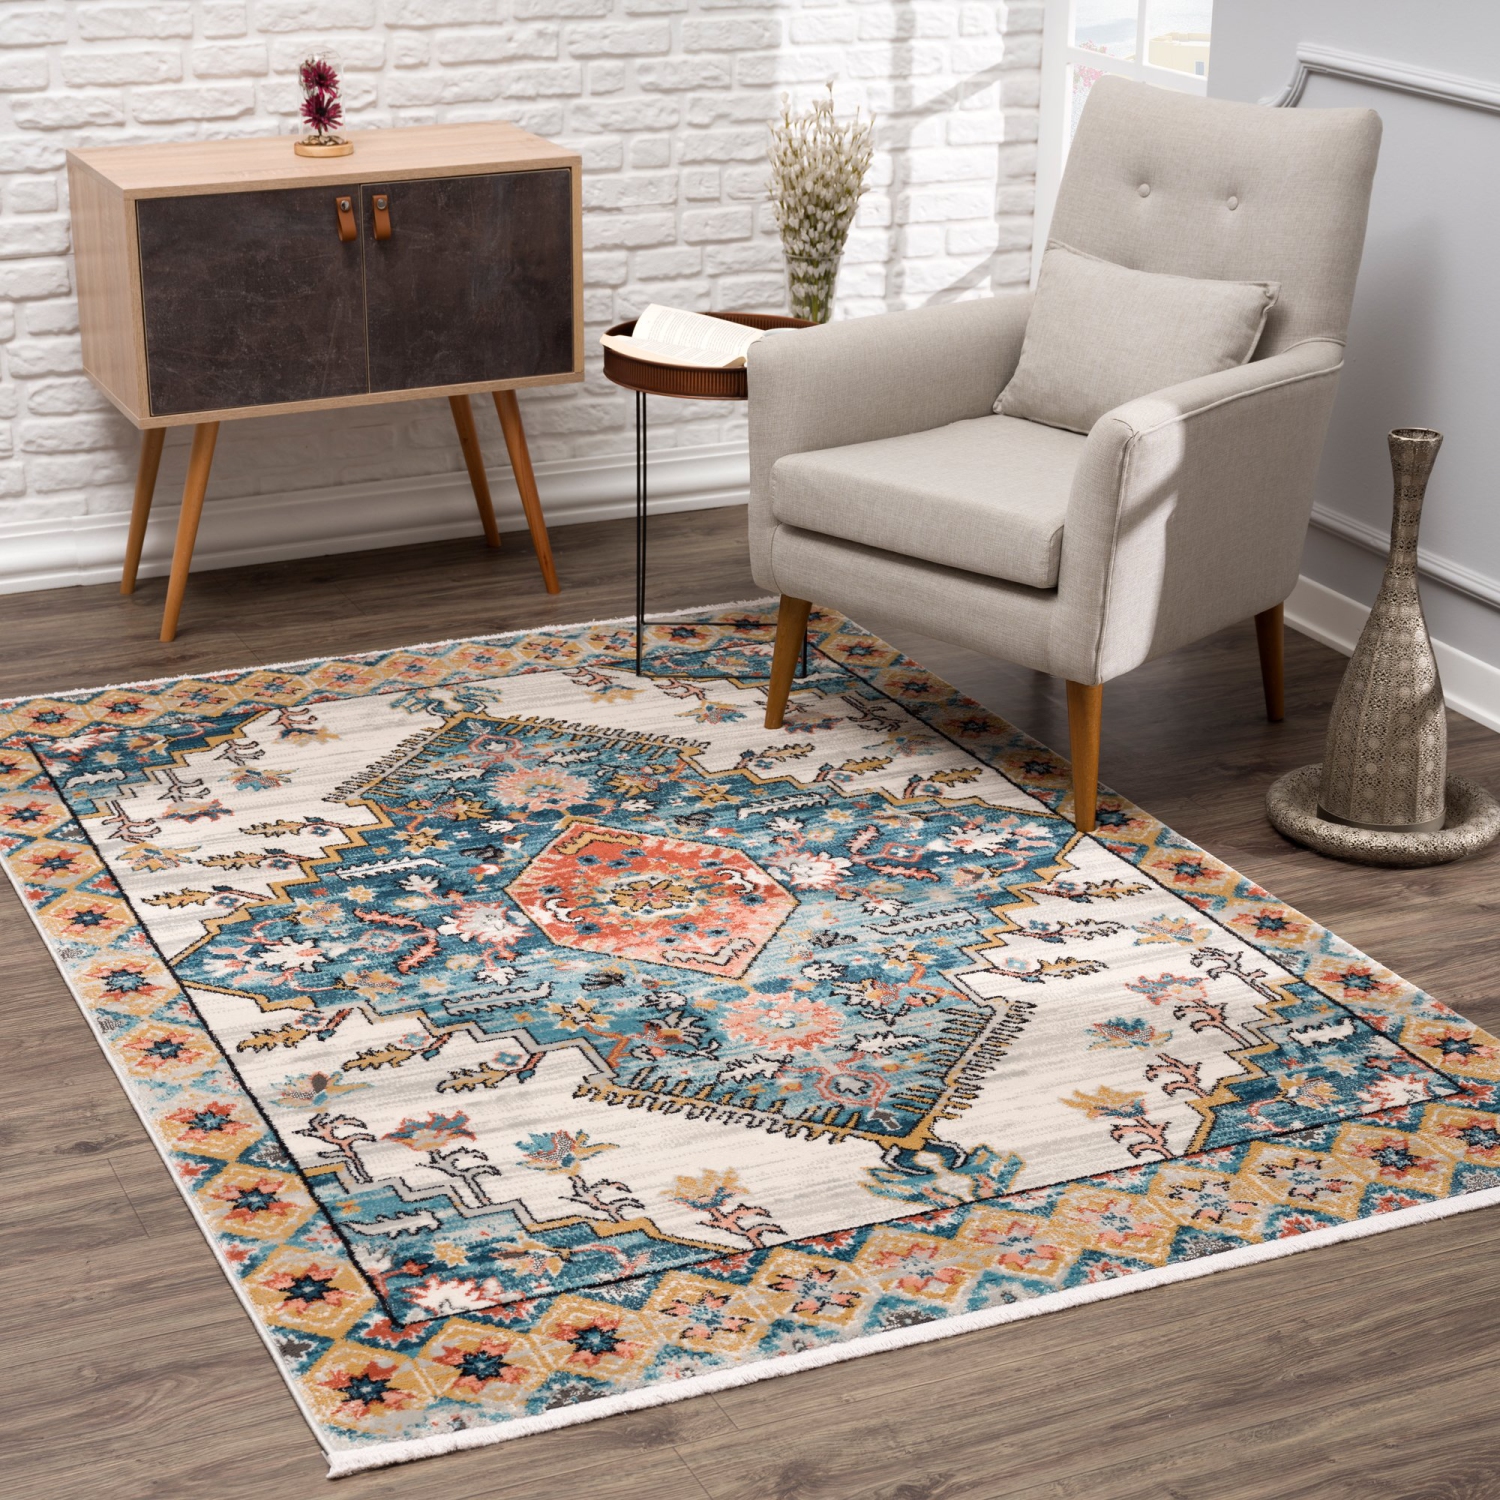 La Dole Rugs Traditional Bordered, Brown And Turquoise Rug Living Room